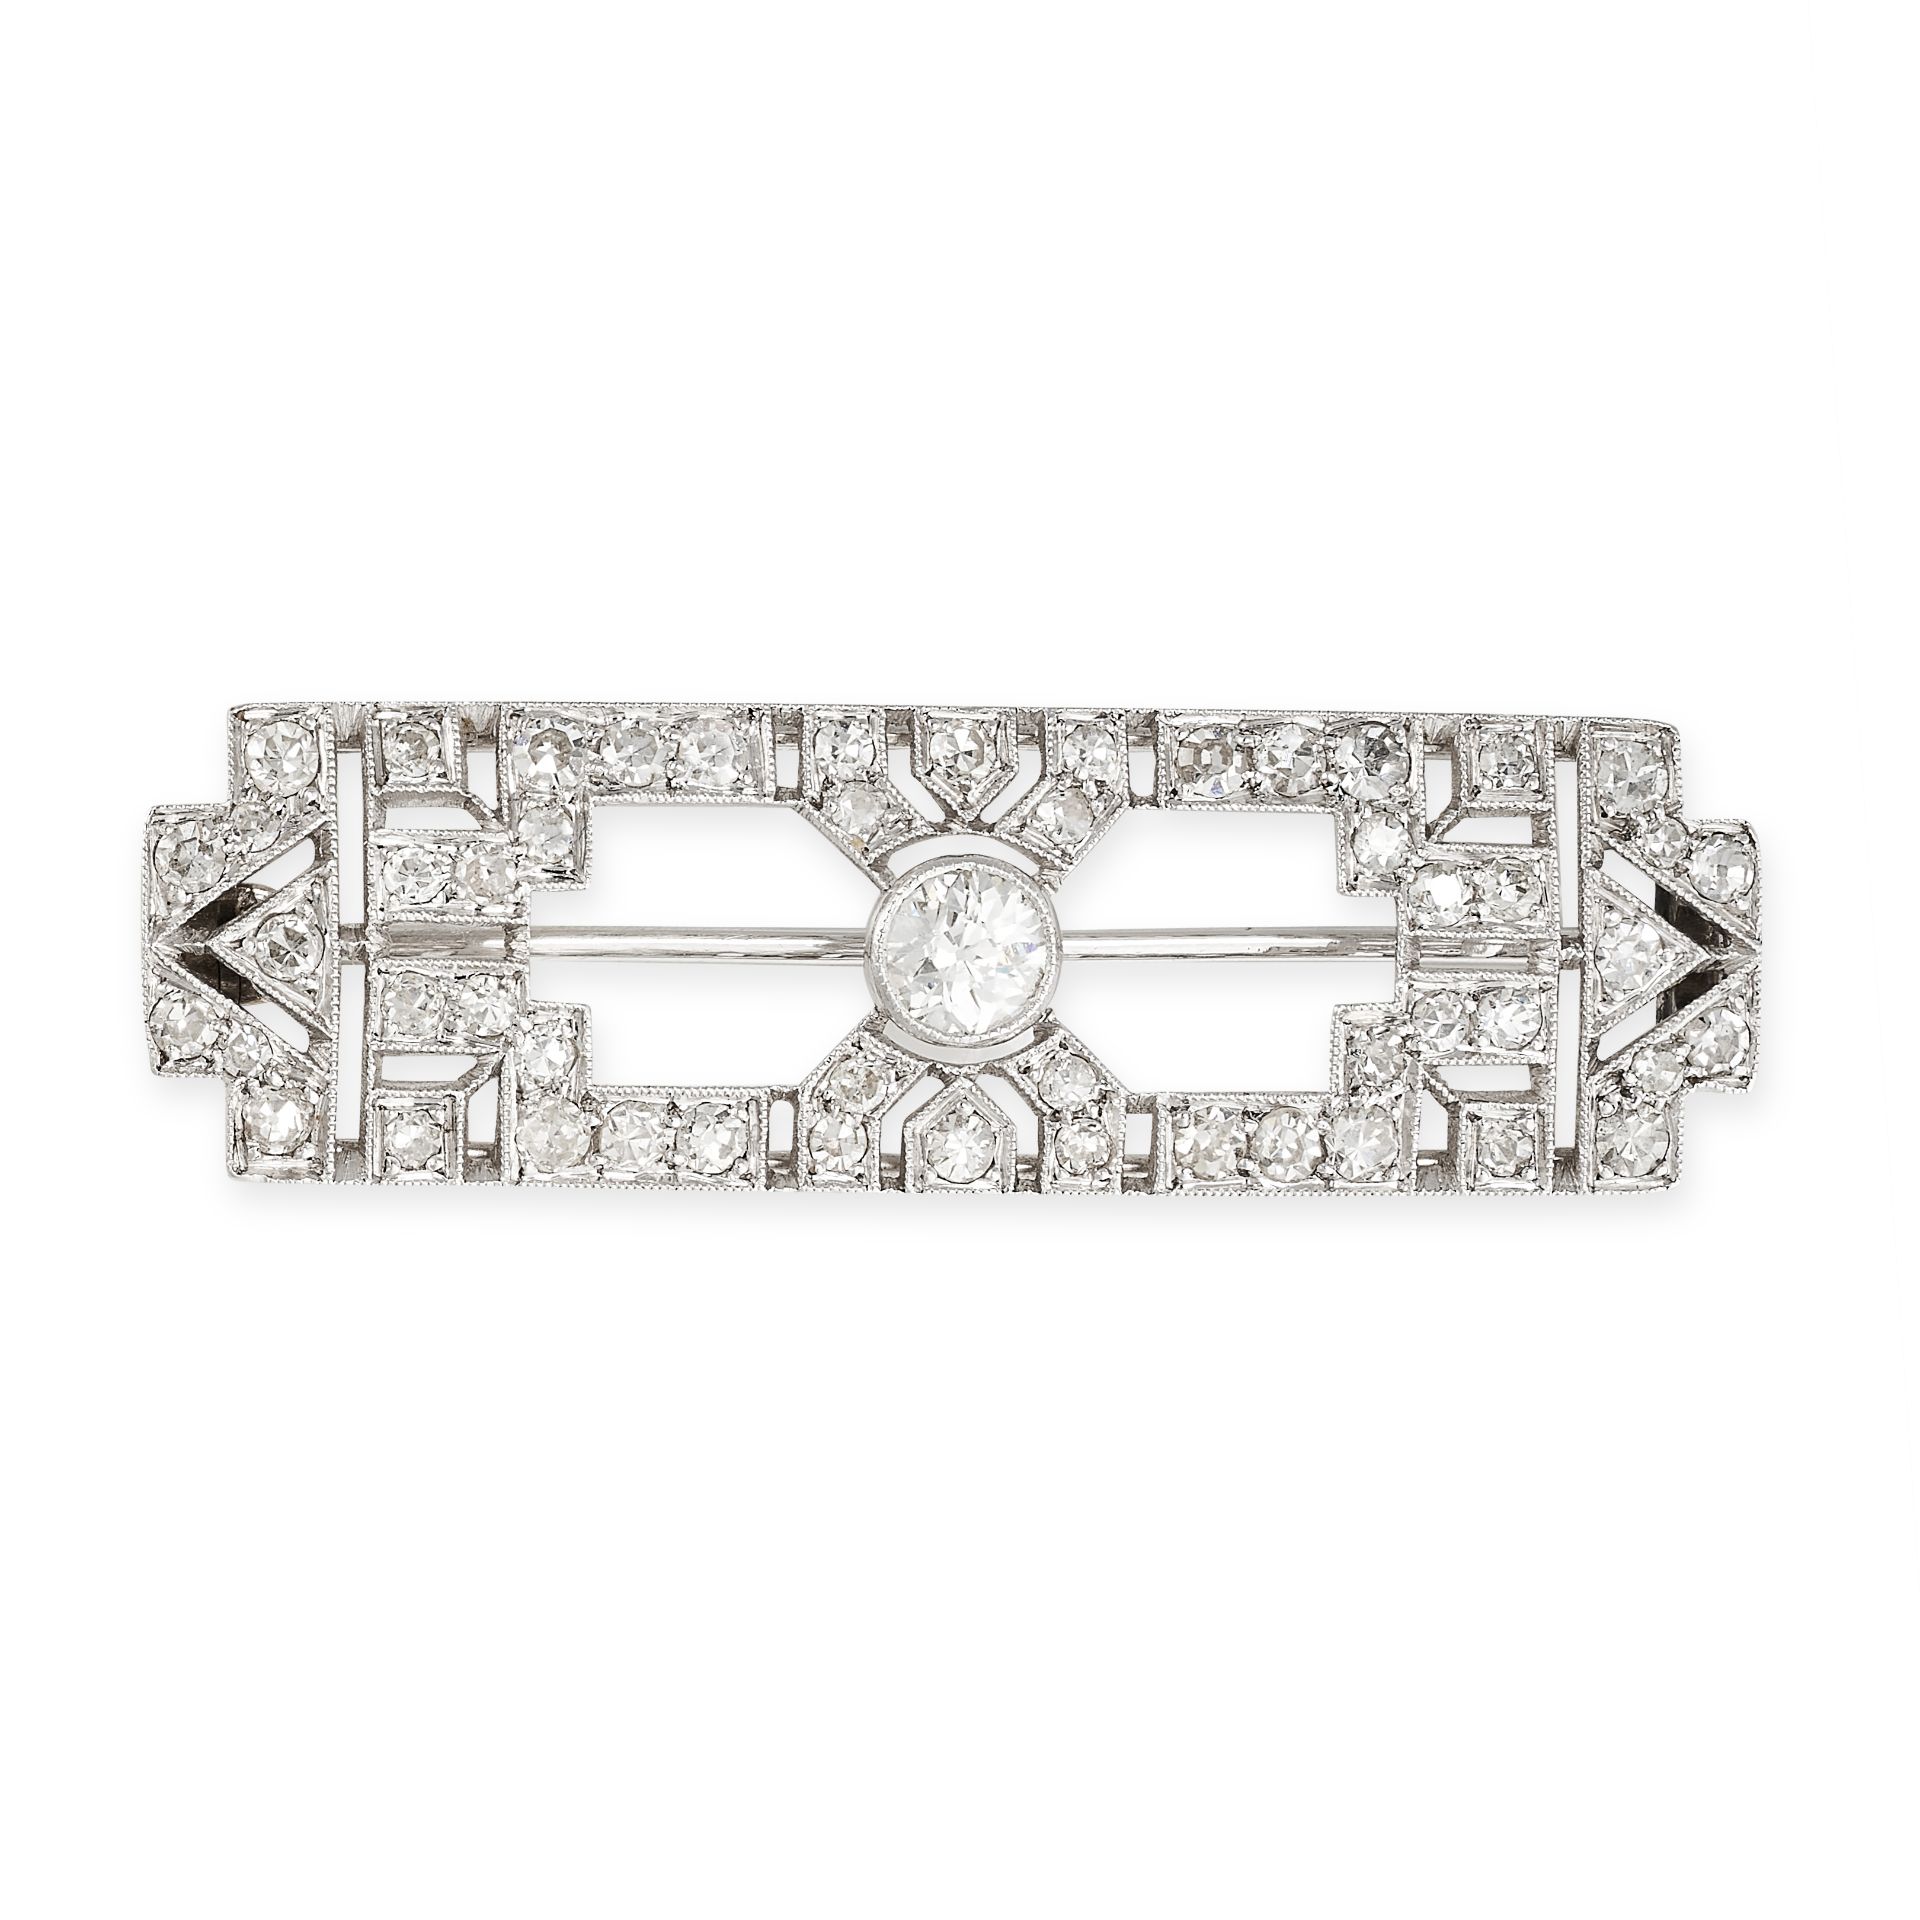 NO RESERVE - AN ART DECO DIAMOND BROOCH, EARLY 20TH CENTURY  Made in platinum  Old European